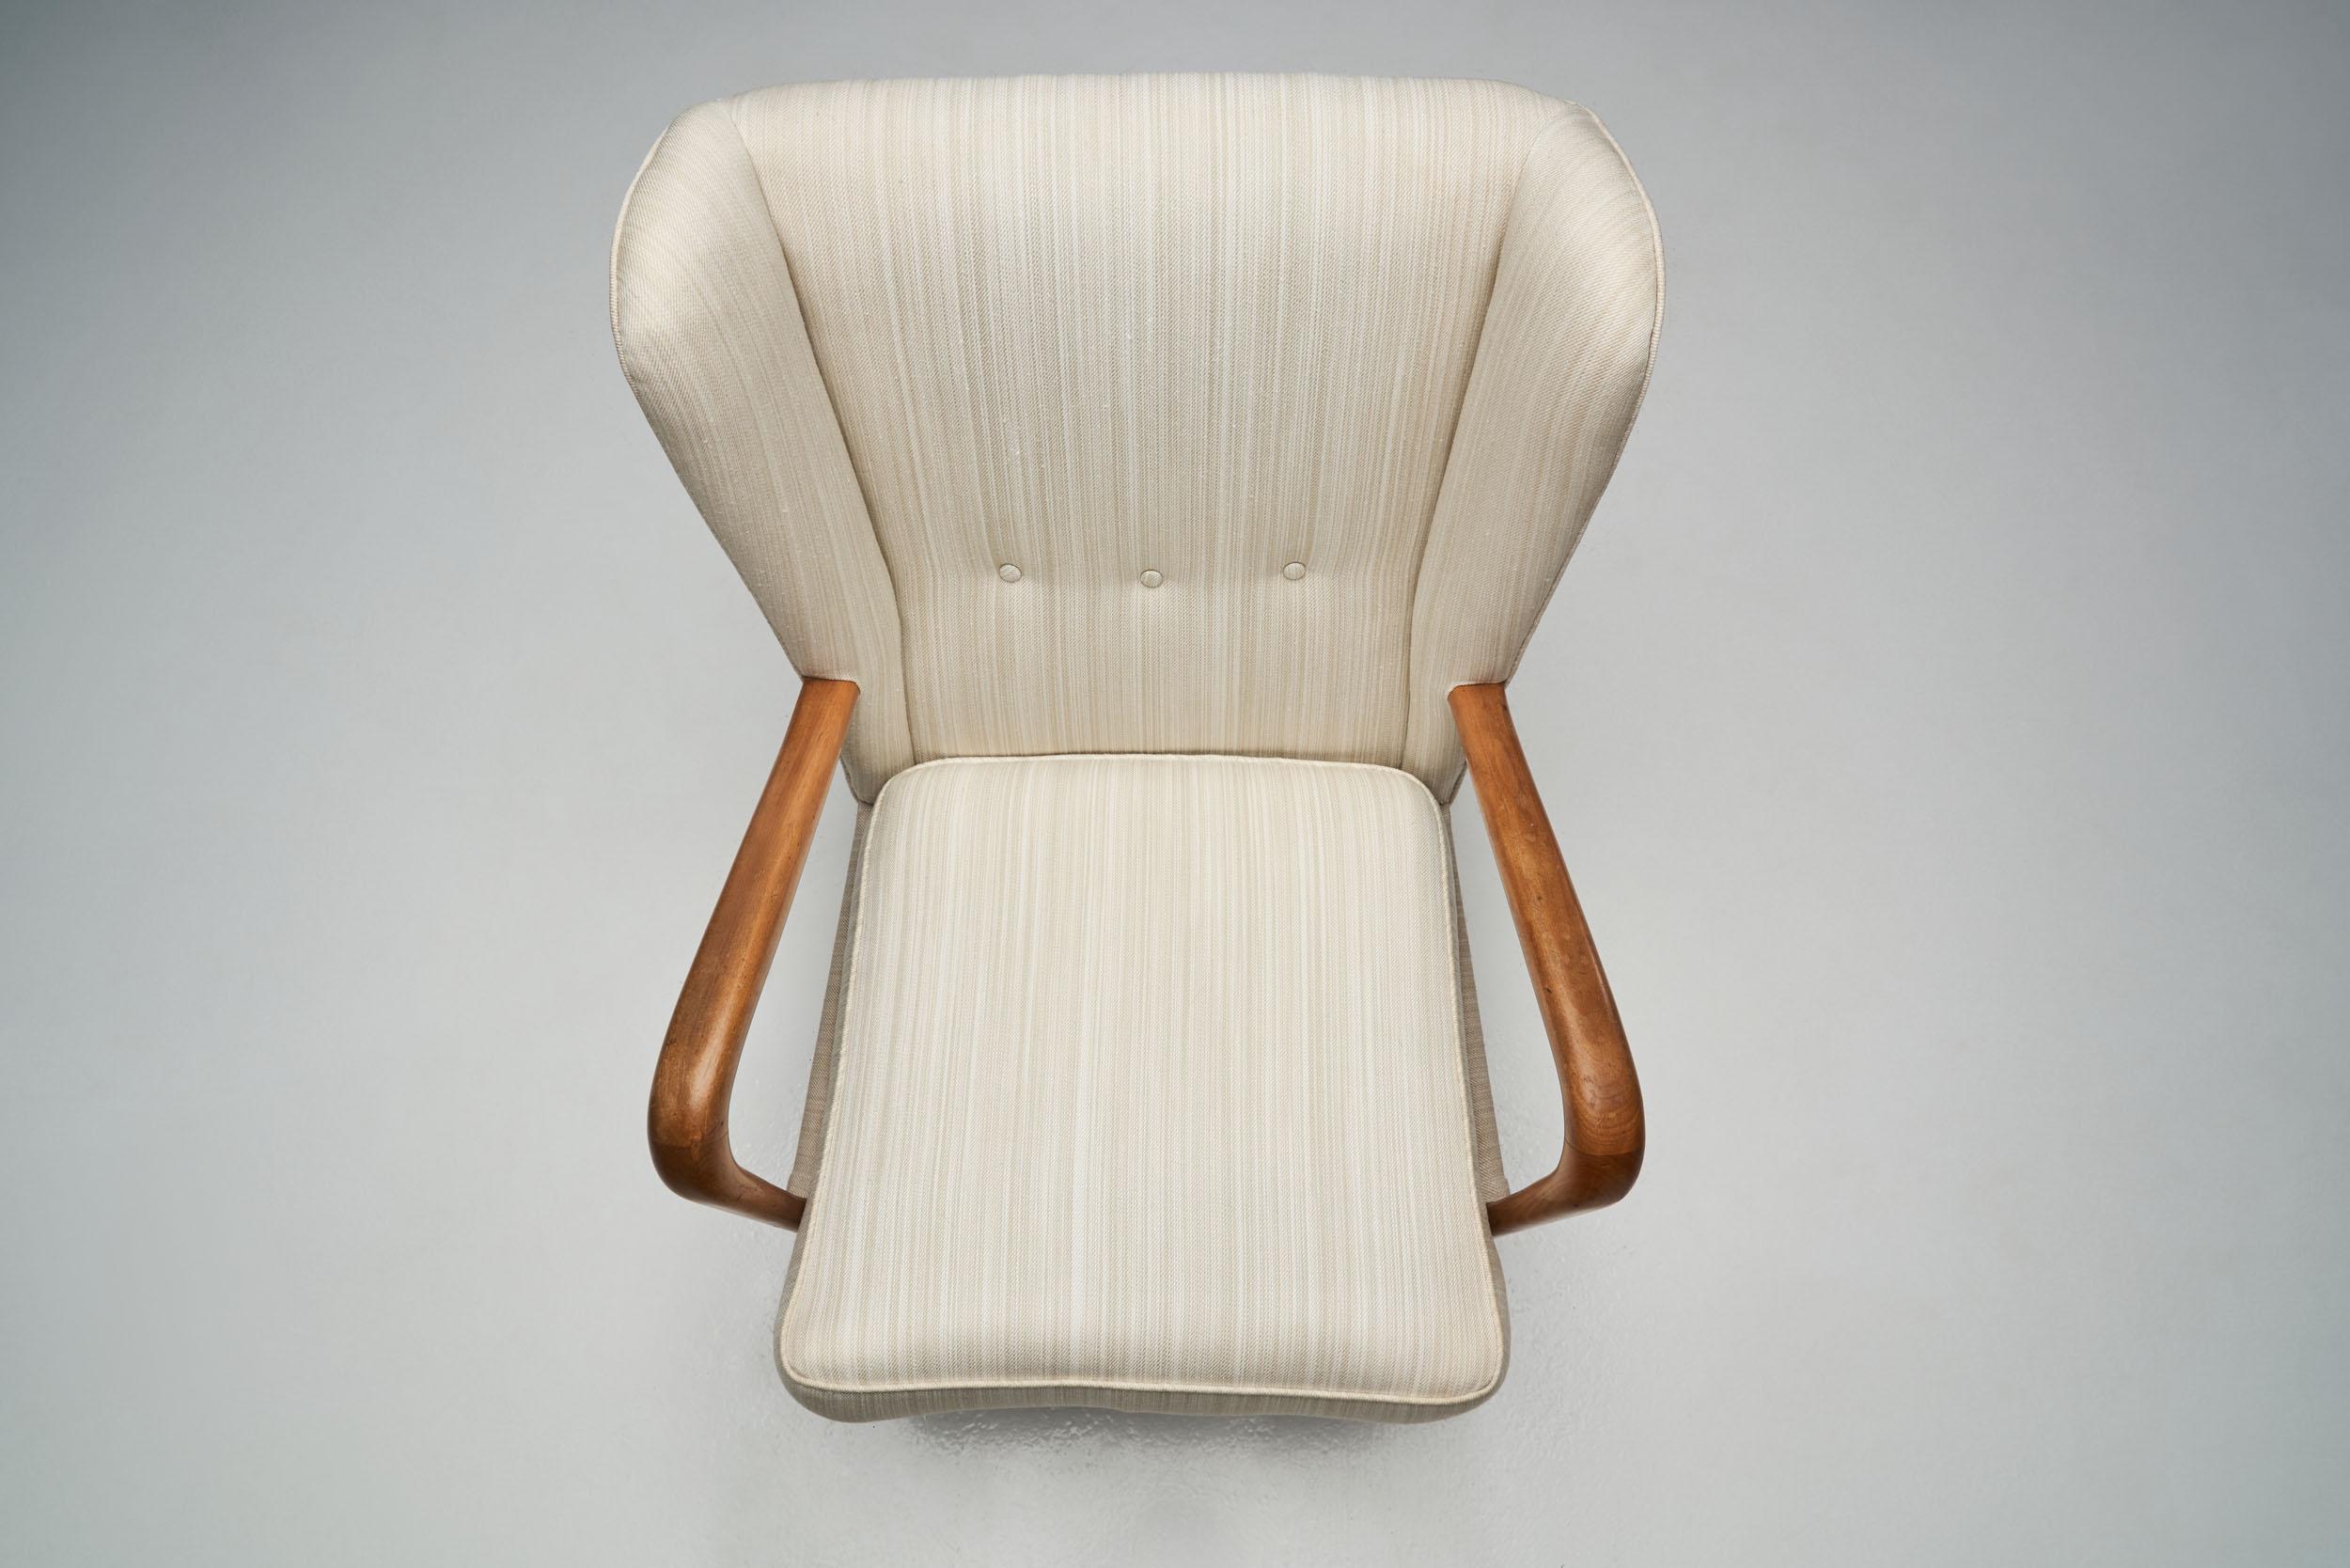 Mid-20th Century Howard Keith “Bambino” Chairs for HK Furniture, England, 1950s